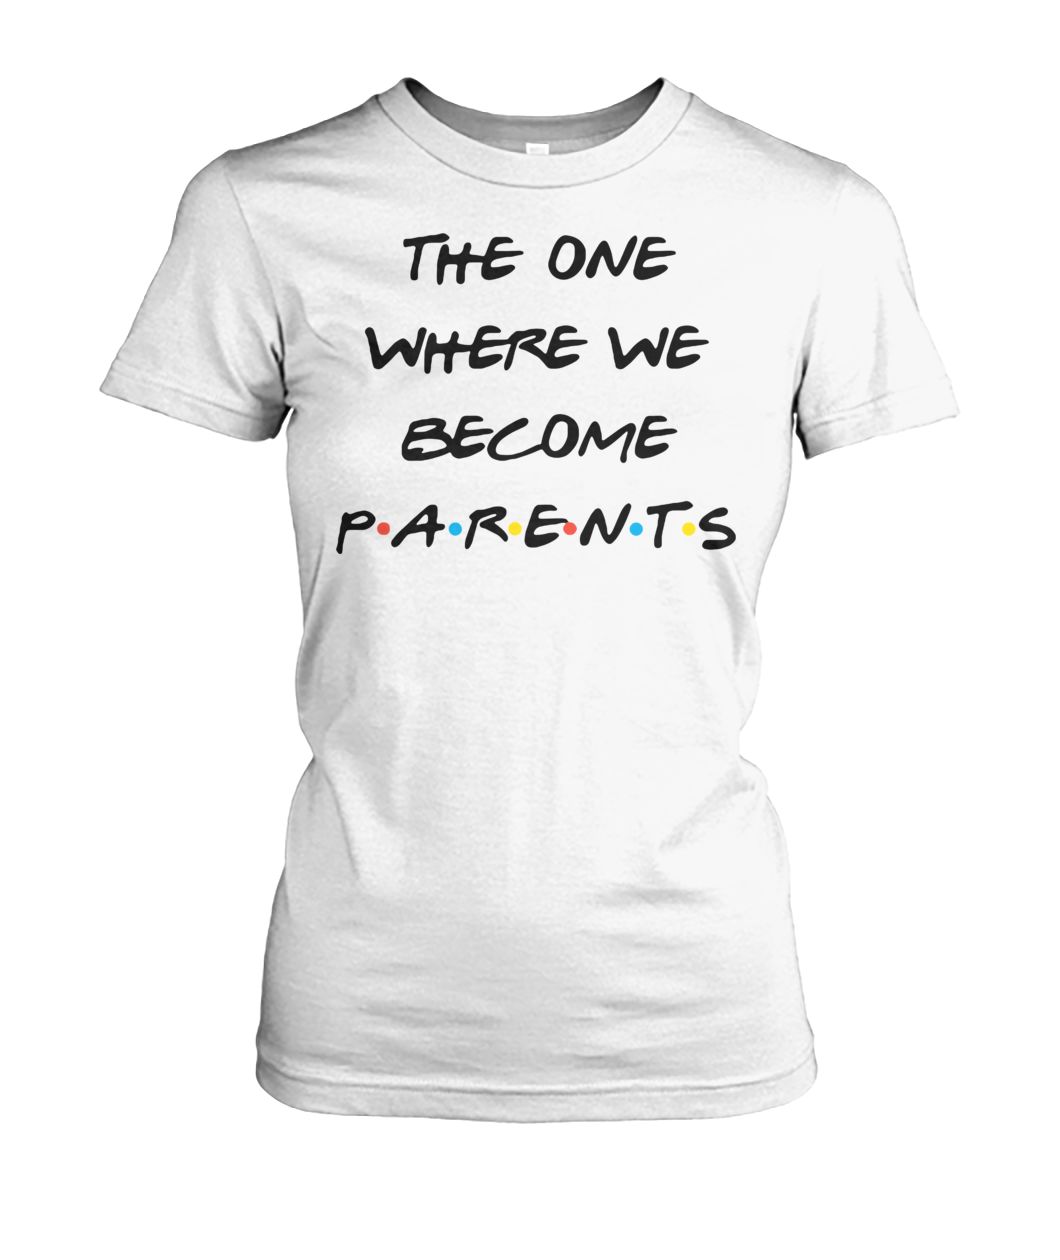 Friend tv show the one where we become parents women's crew tee